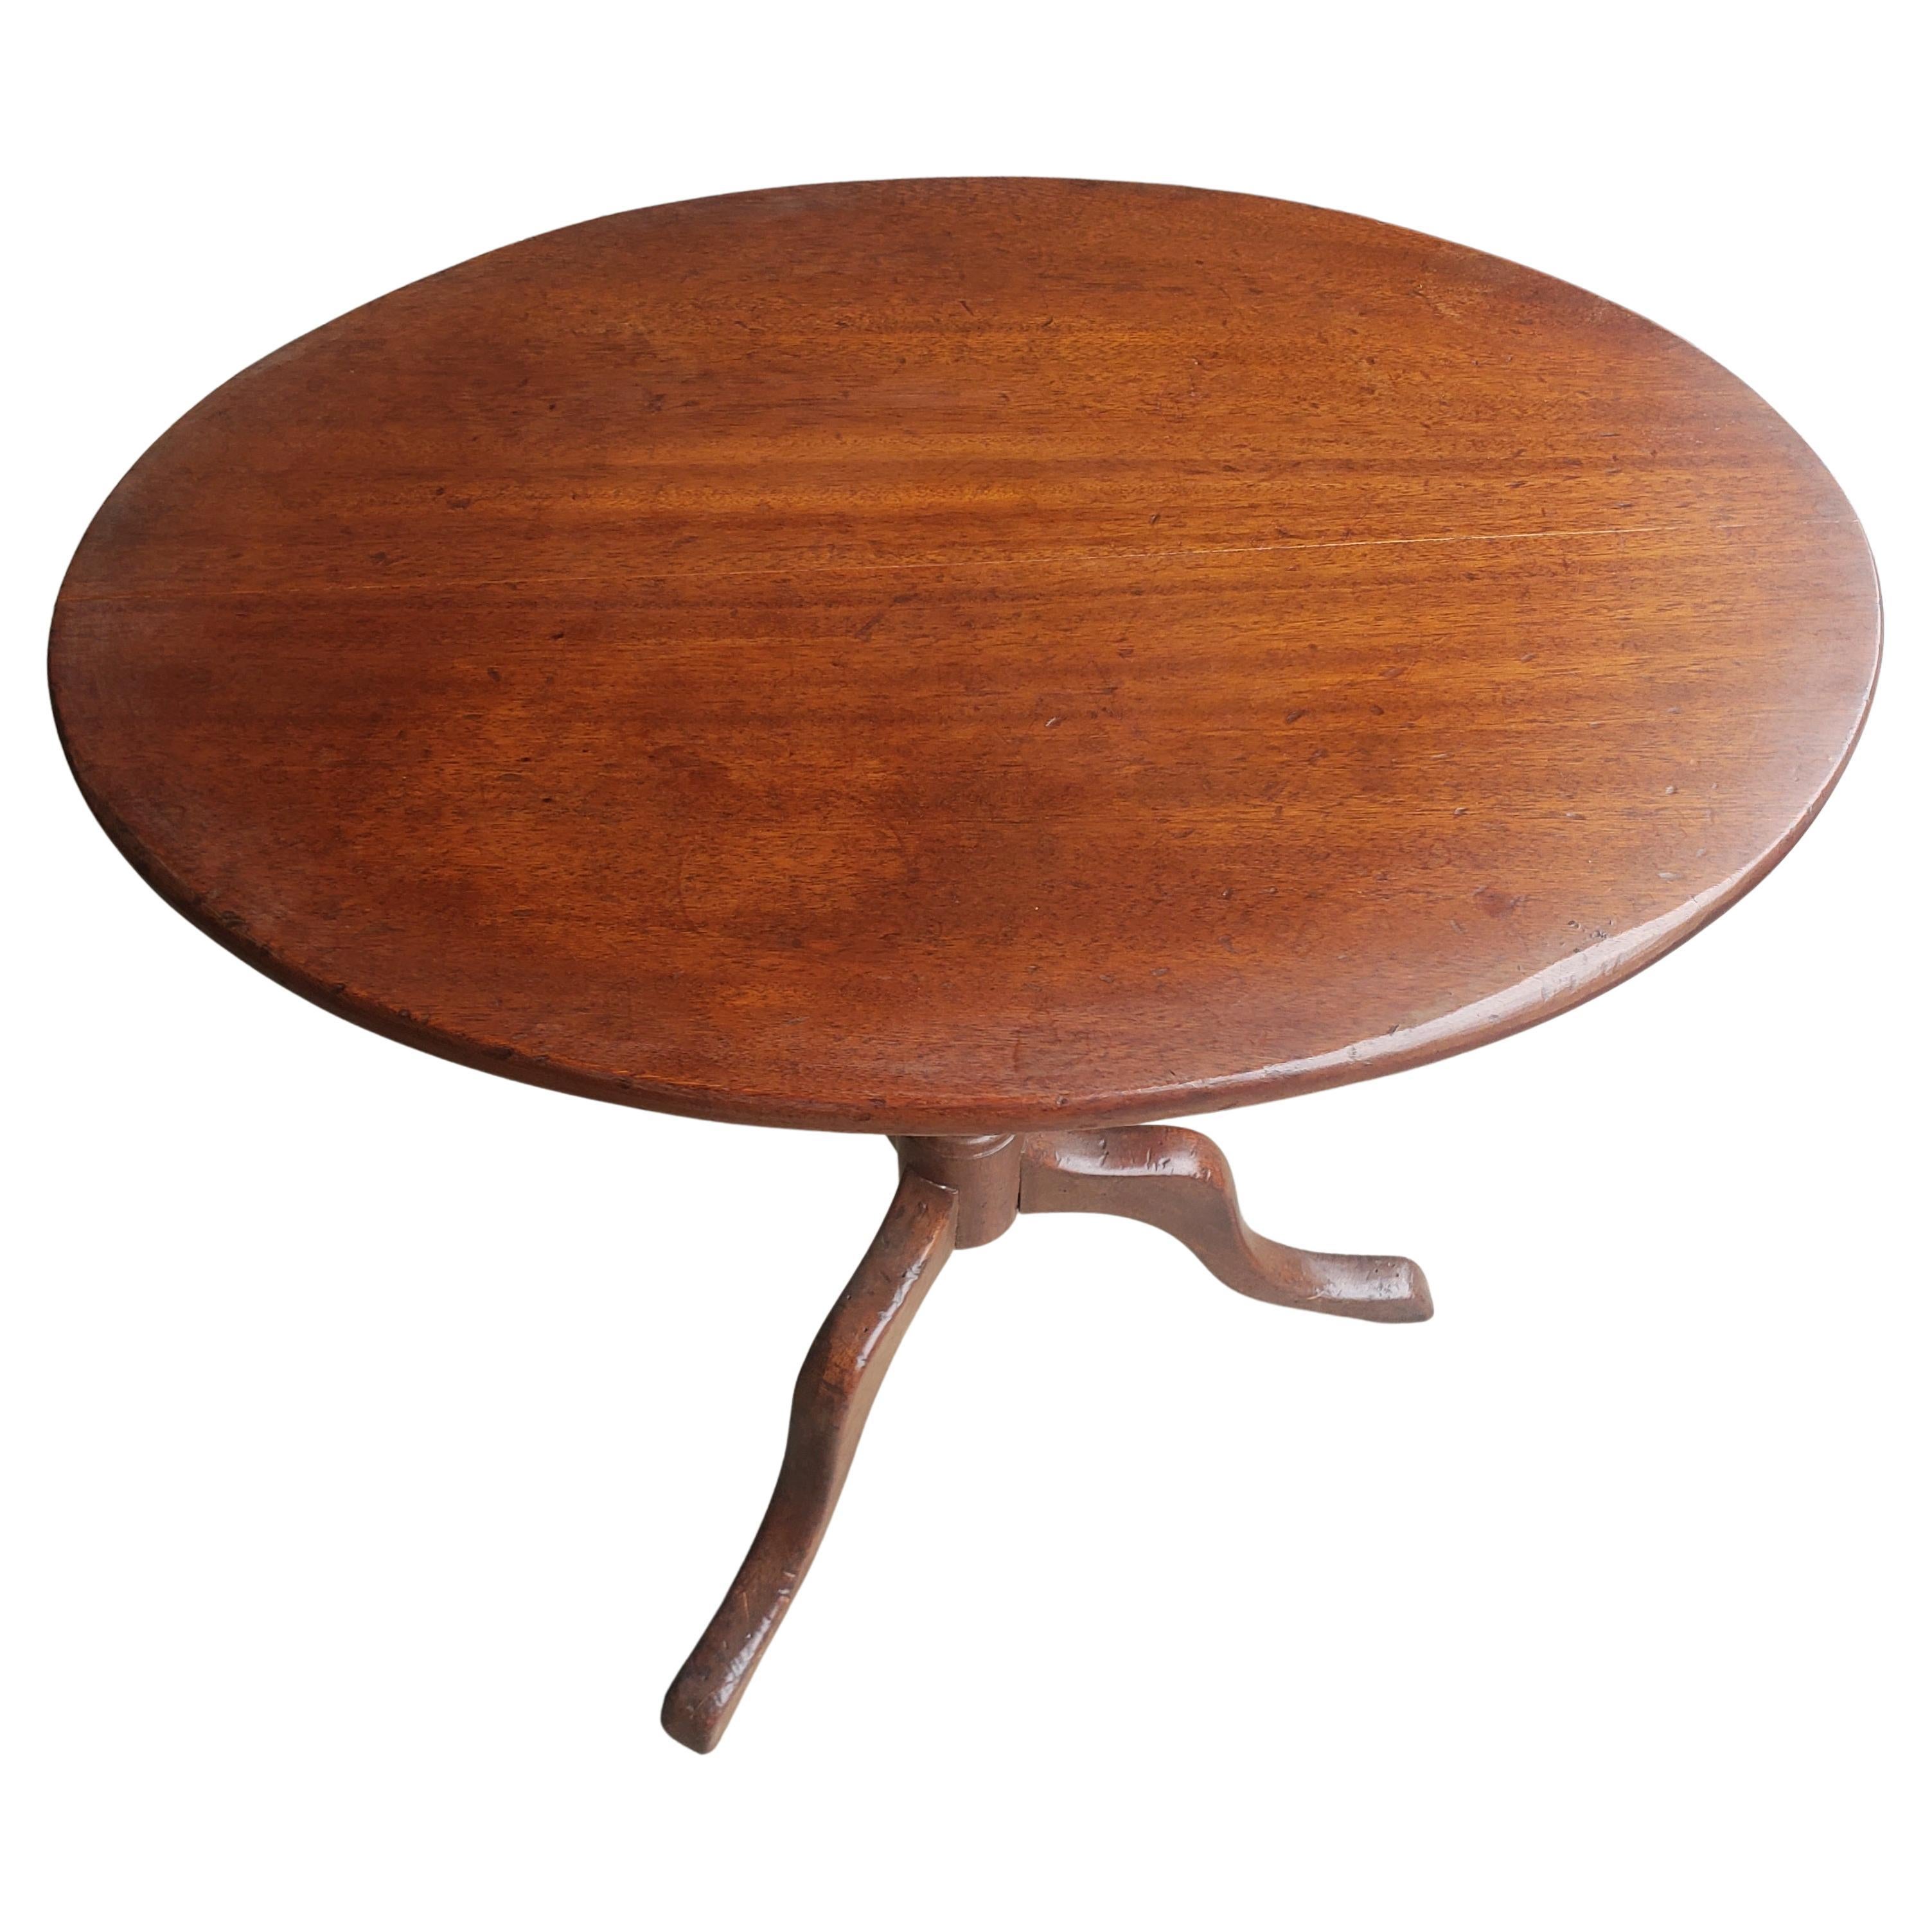 Queen Anne 1940s Mahogany Oval Tilt-Top Tripod Candle Stand Side Table For Sale